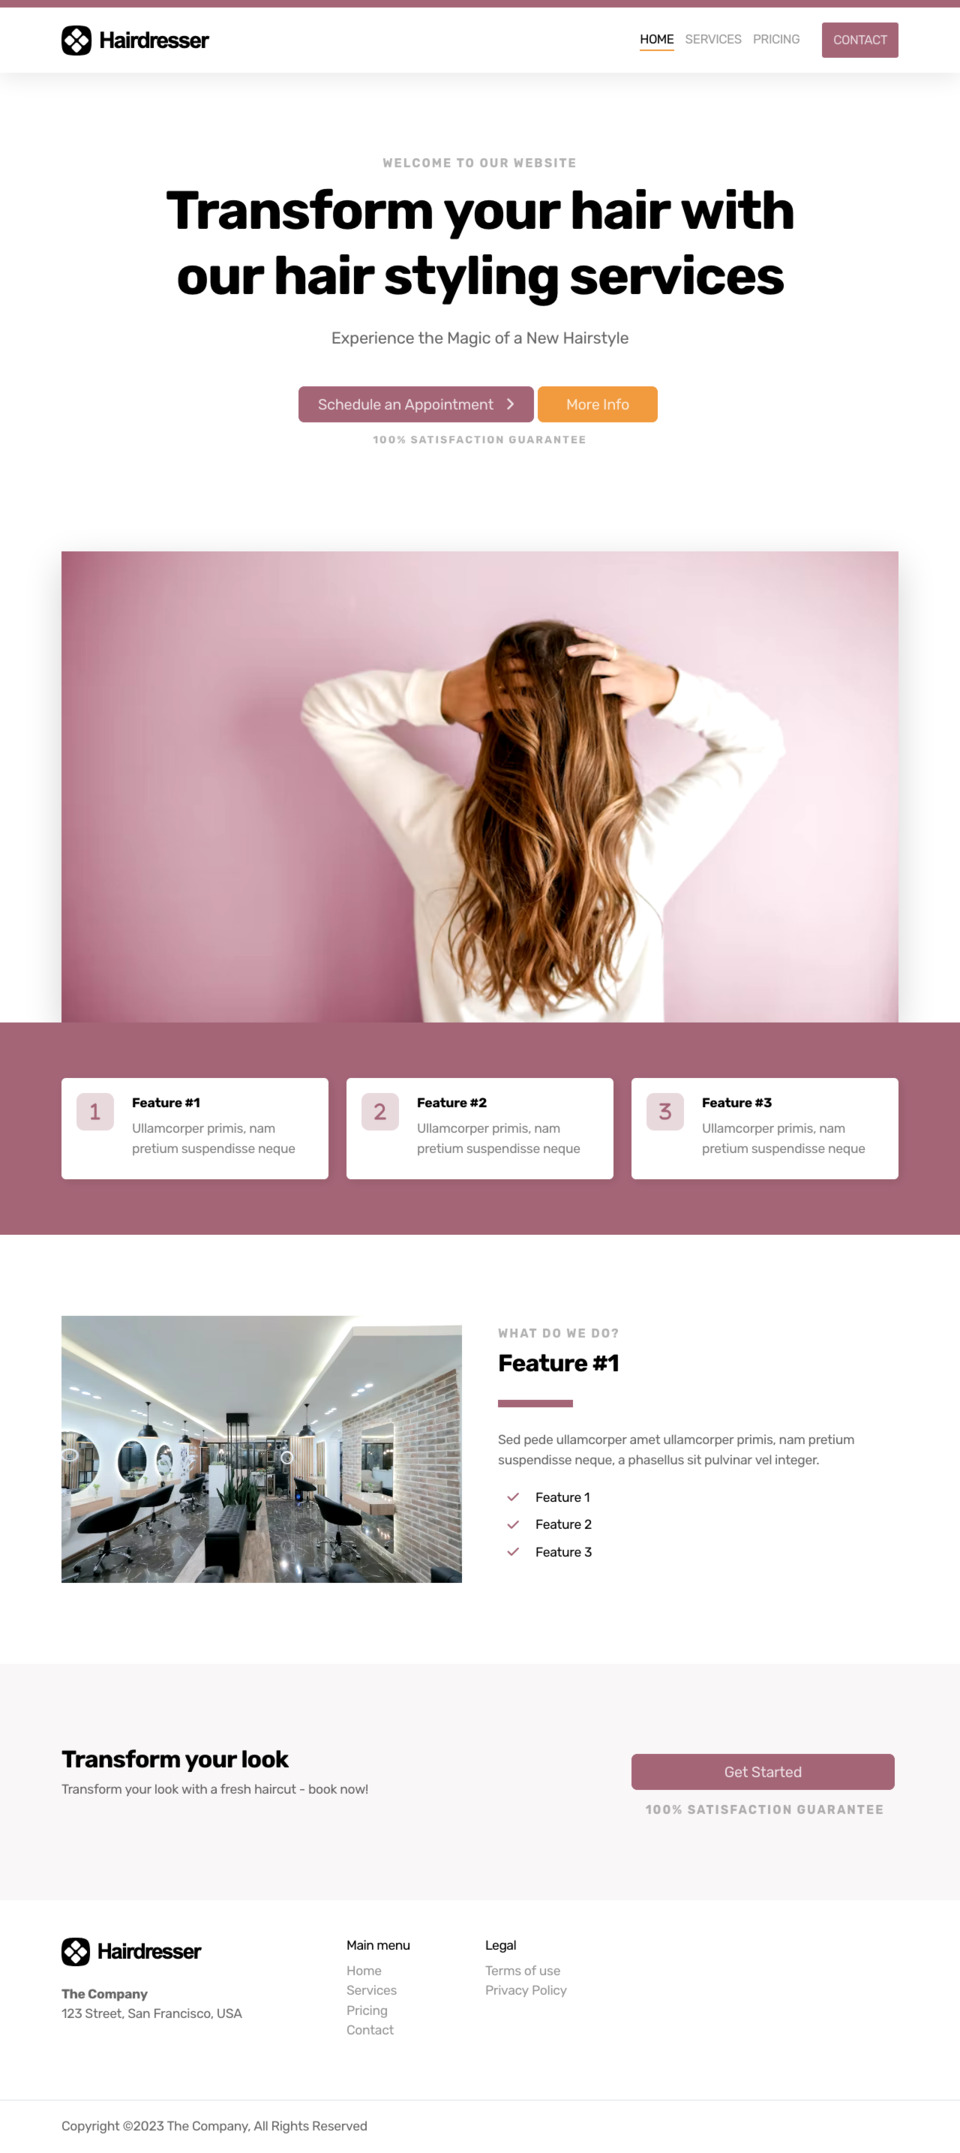 Hair Dresser Website Template - Hair salons, barbers, beauticians, beauty salons, and professional hairstylists